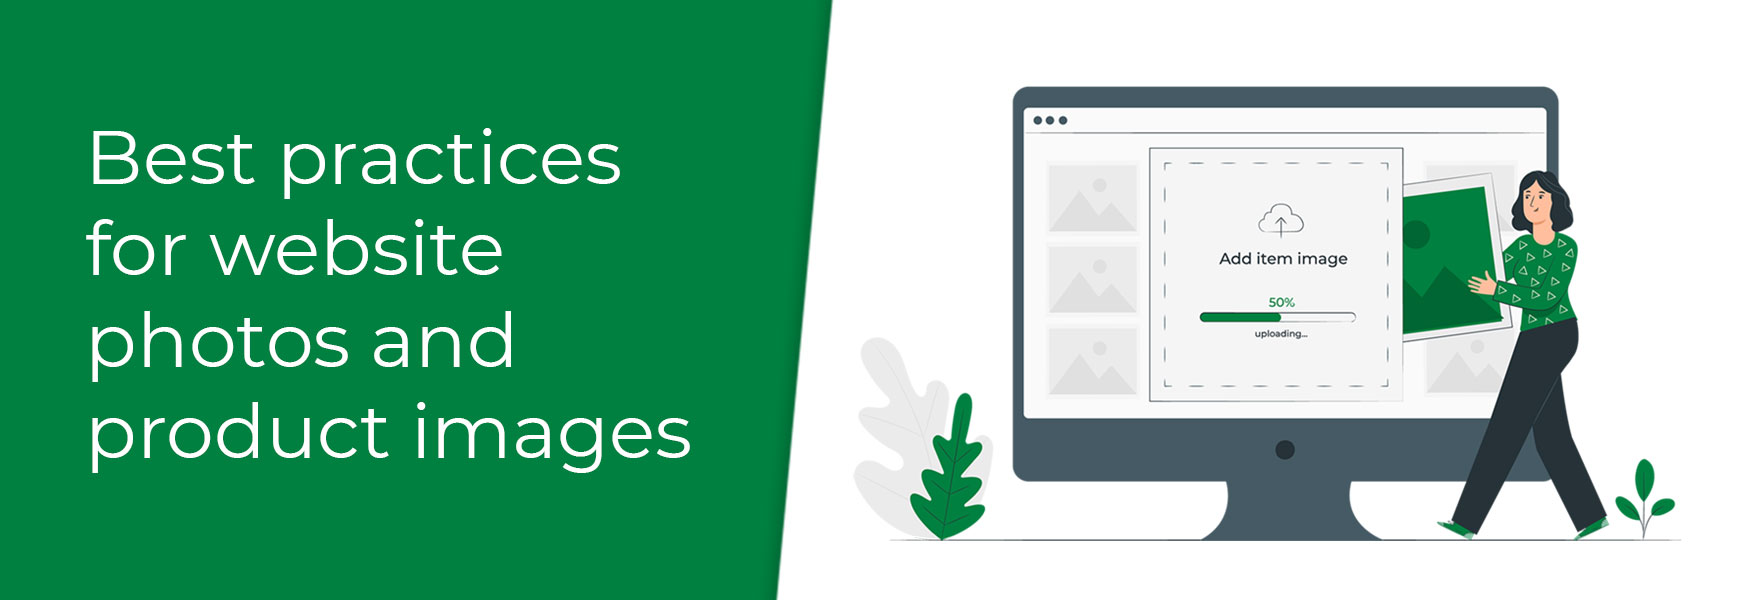 Best practices for website photos and product images